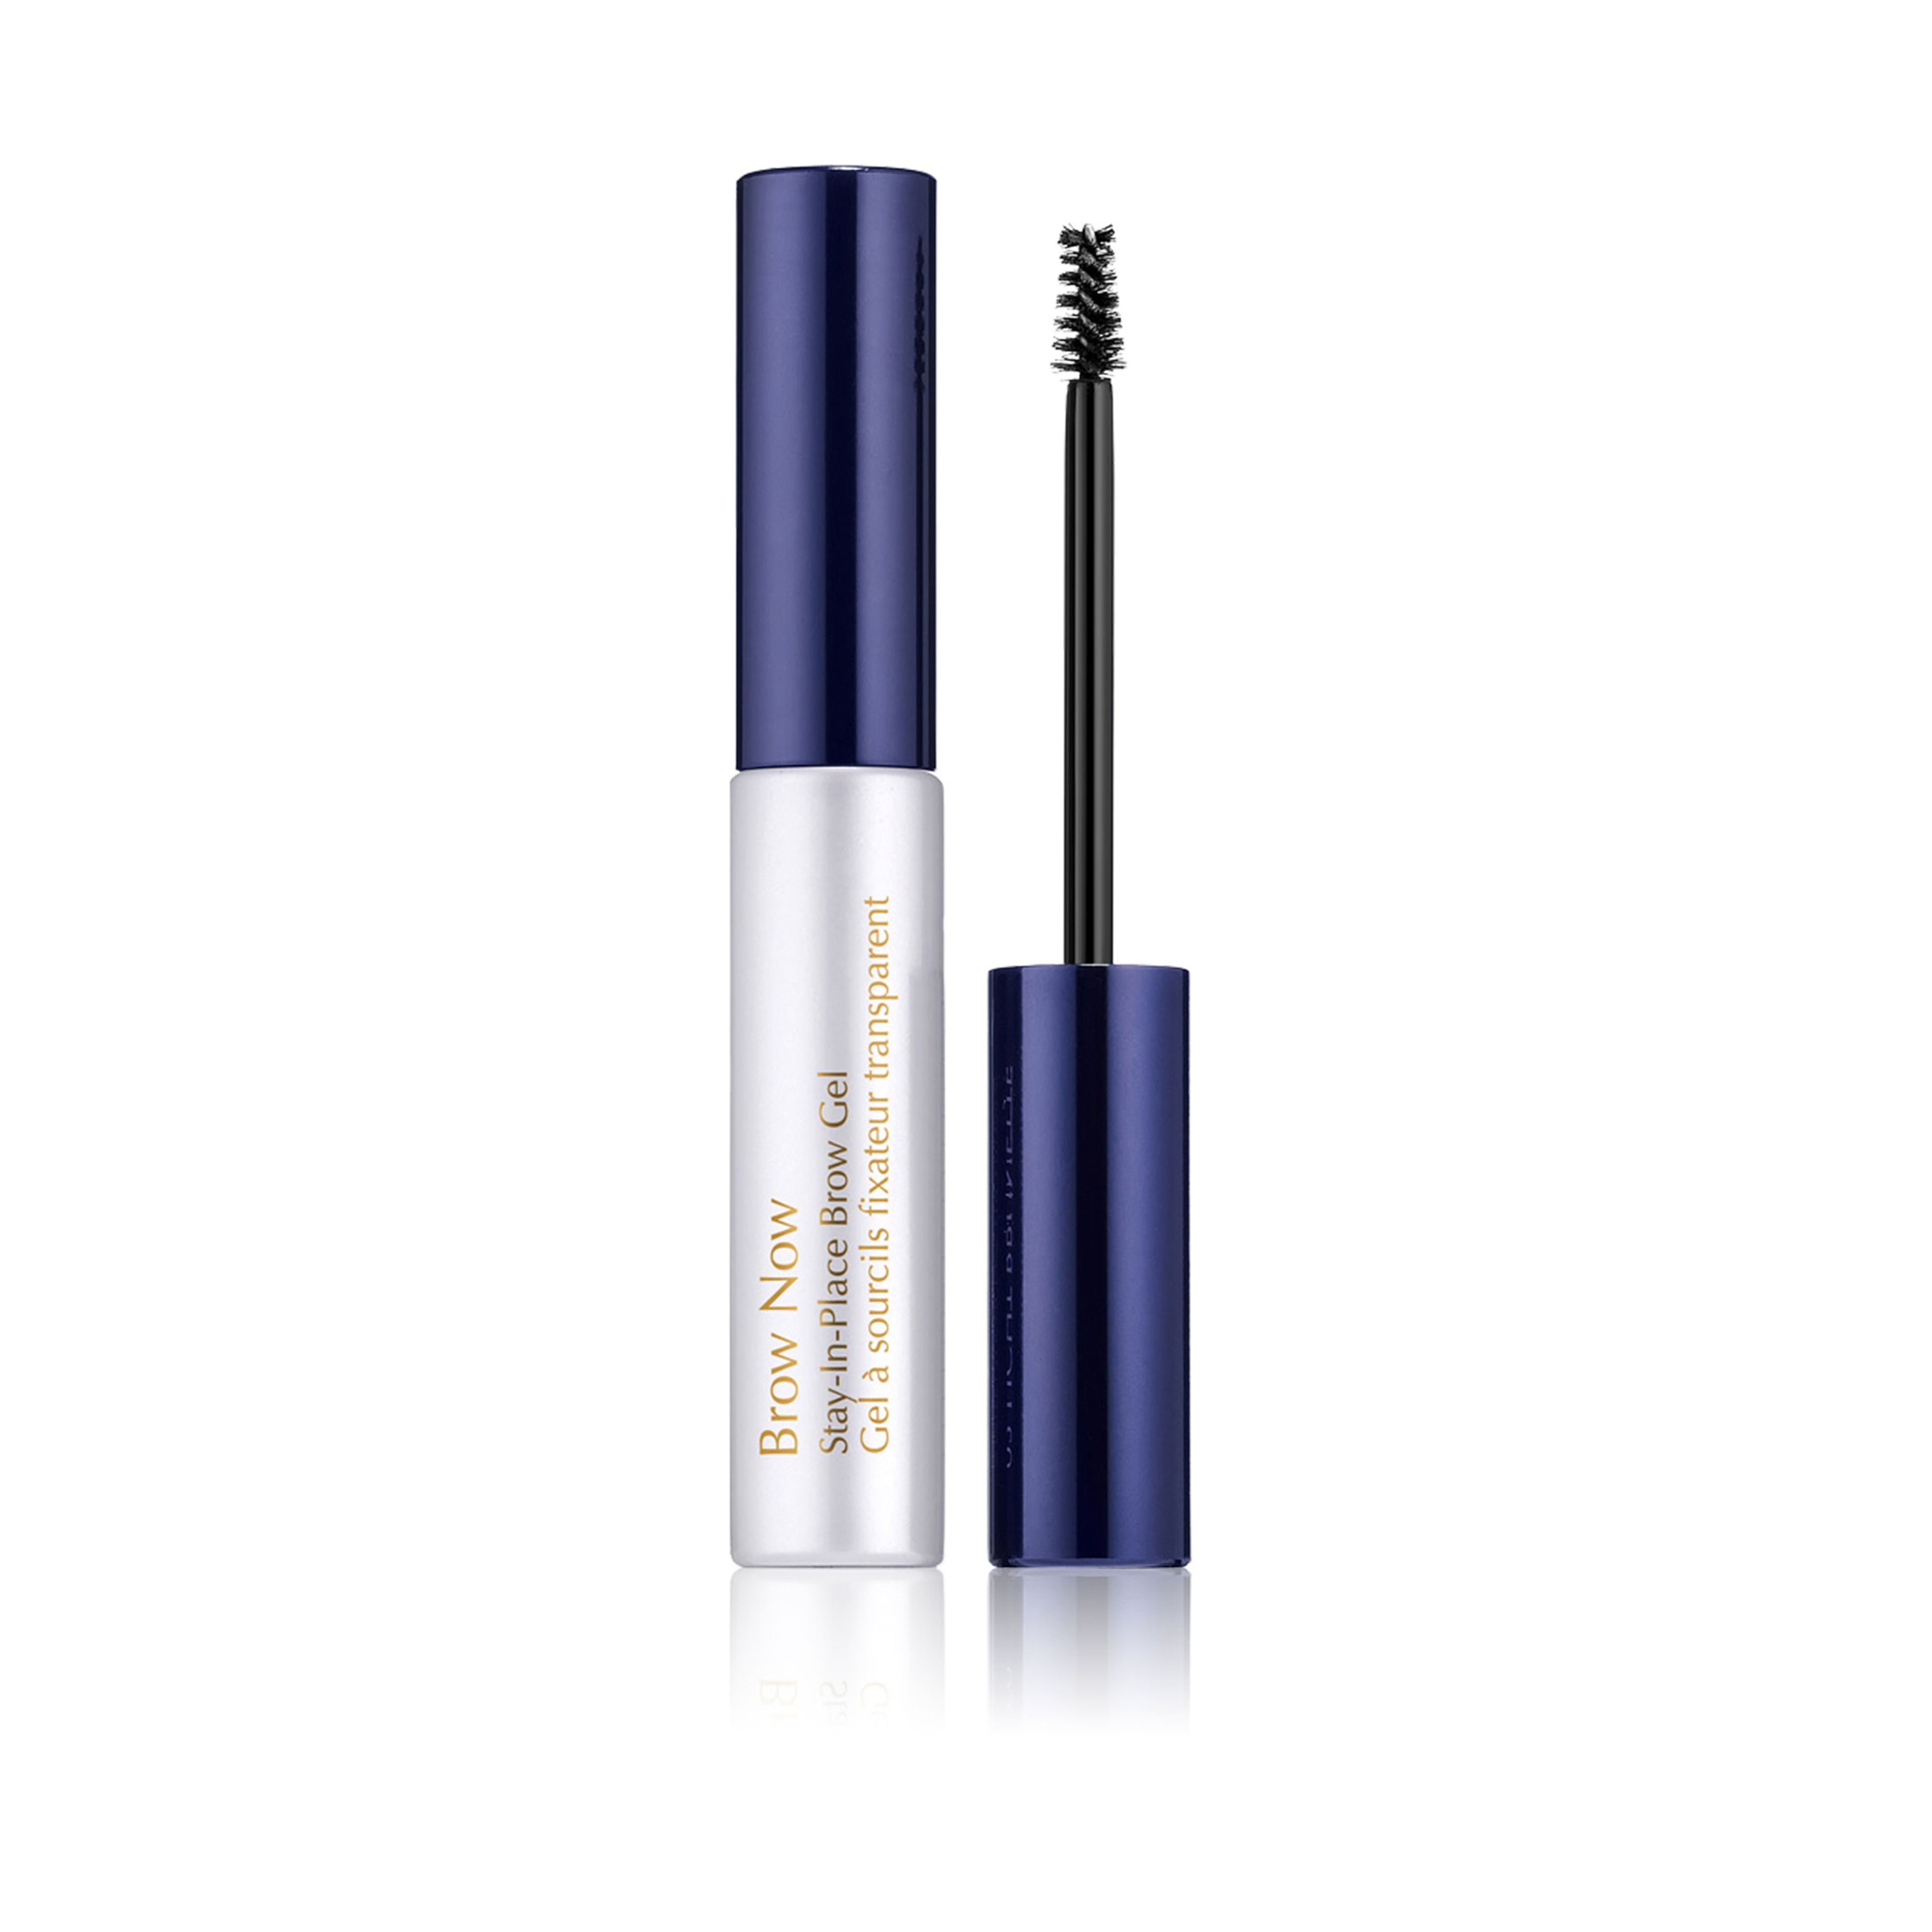 Estee Lauder Brow Now Stay-in-place Gel 1